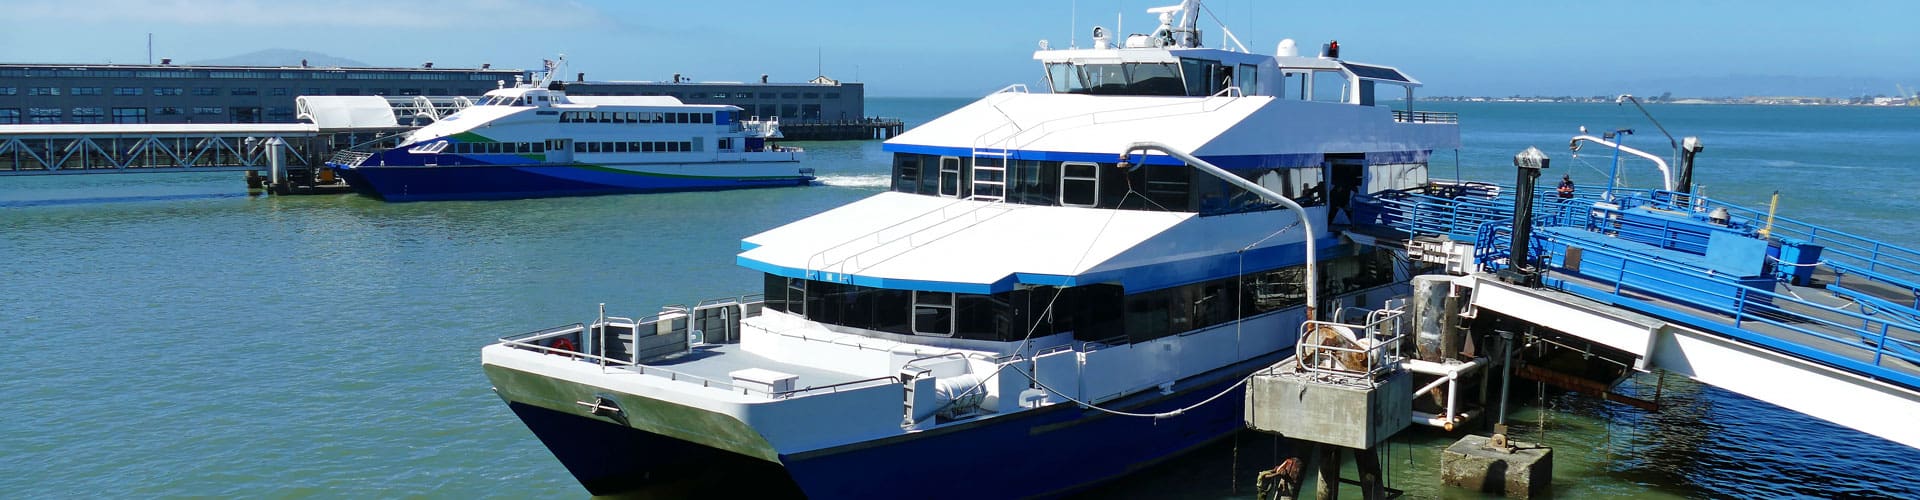 Ten questions to ask before boarding a commercial boat for a short cruise or tour